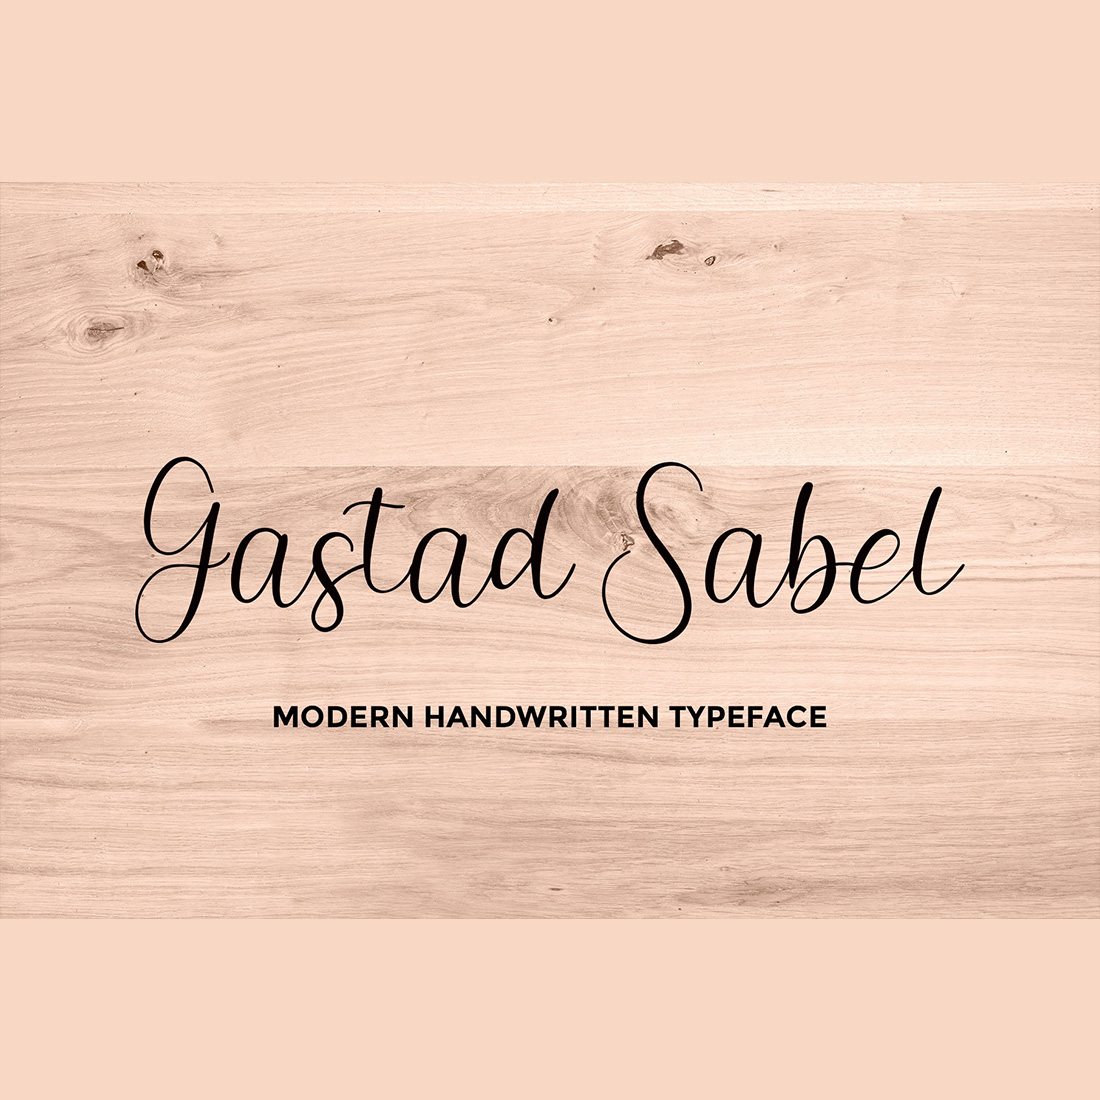 An image with text showing the elegant Ambattul font